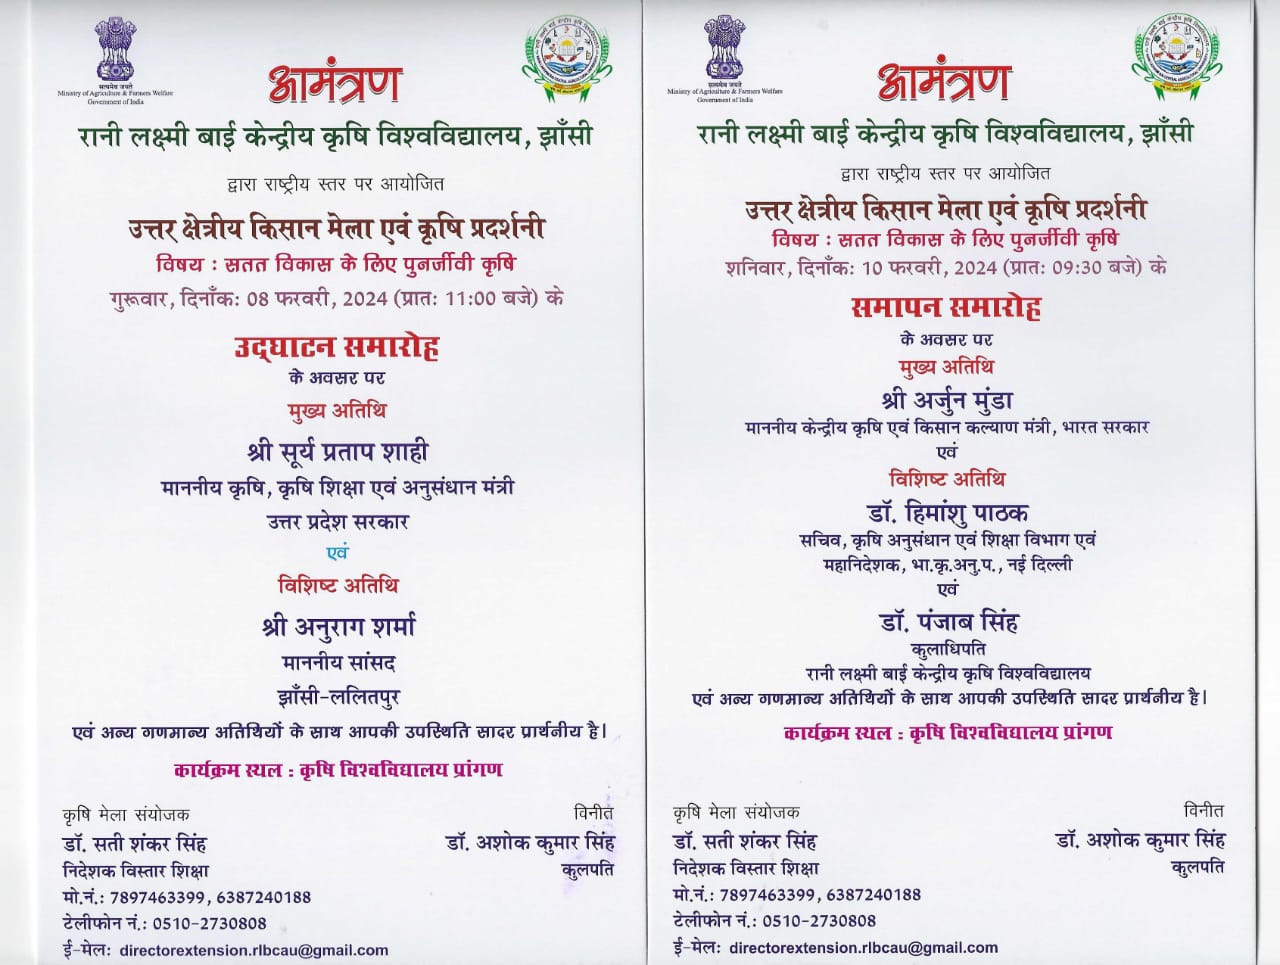 National Agricultural Exhibition and Farmer’s Fair Inauguration by Honorable Agriculture Minister at Rani Lakshmi Bai Central Agricultural University